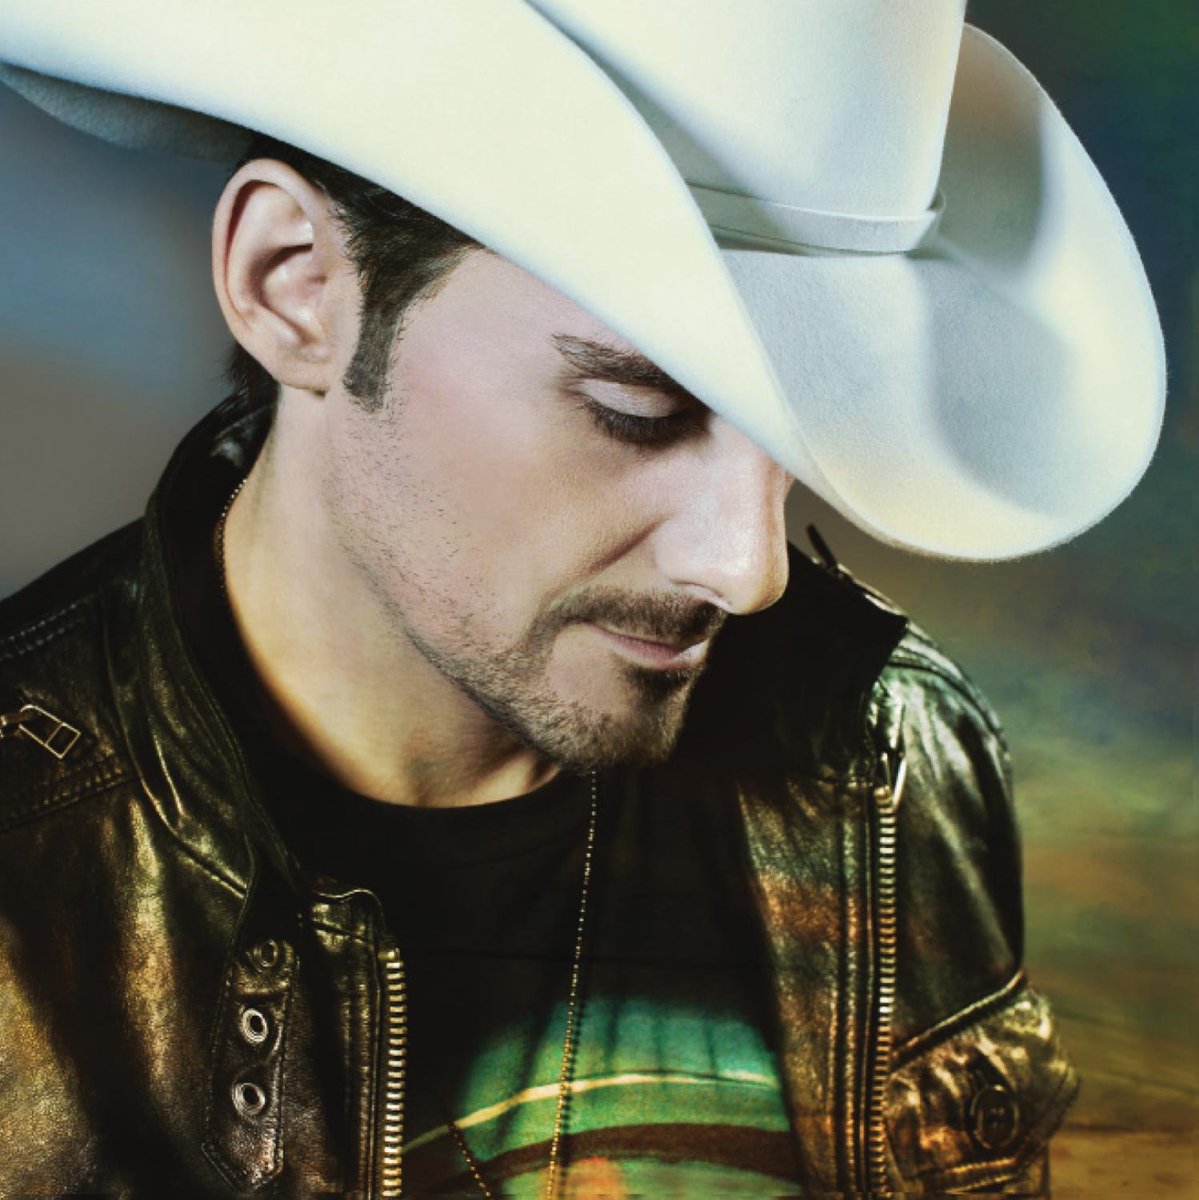 My #thursdayCountryRockmasterpieceAlbum is: 'This Is Country Music' (2011) https://t.co/2qEQaBYOJT by Brad Paisley https://t.co/mIKNgyUHed